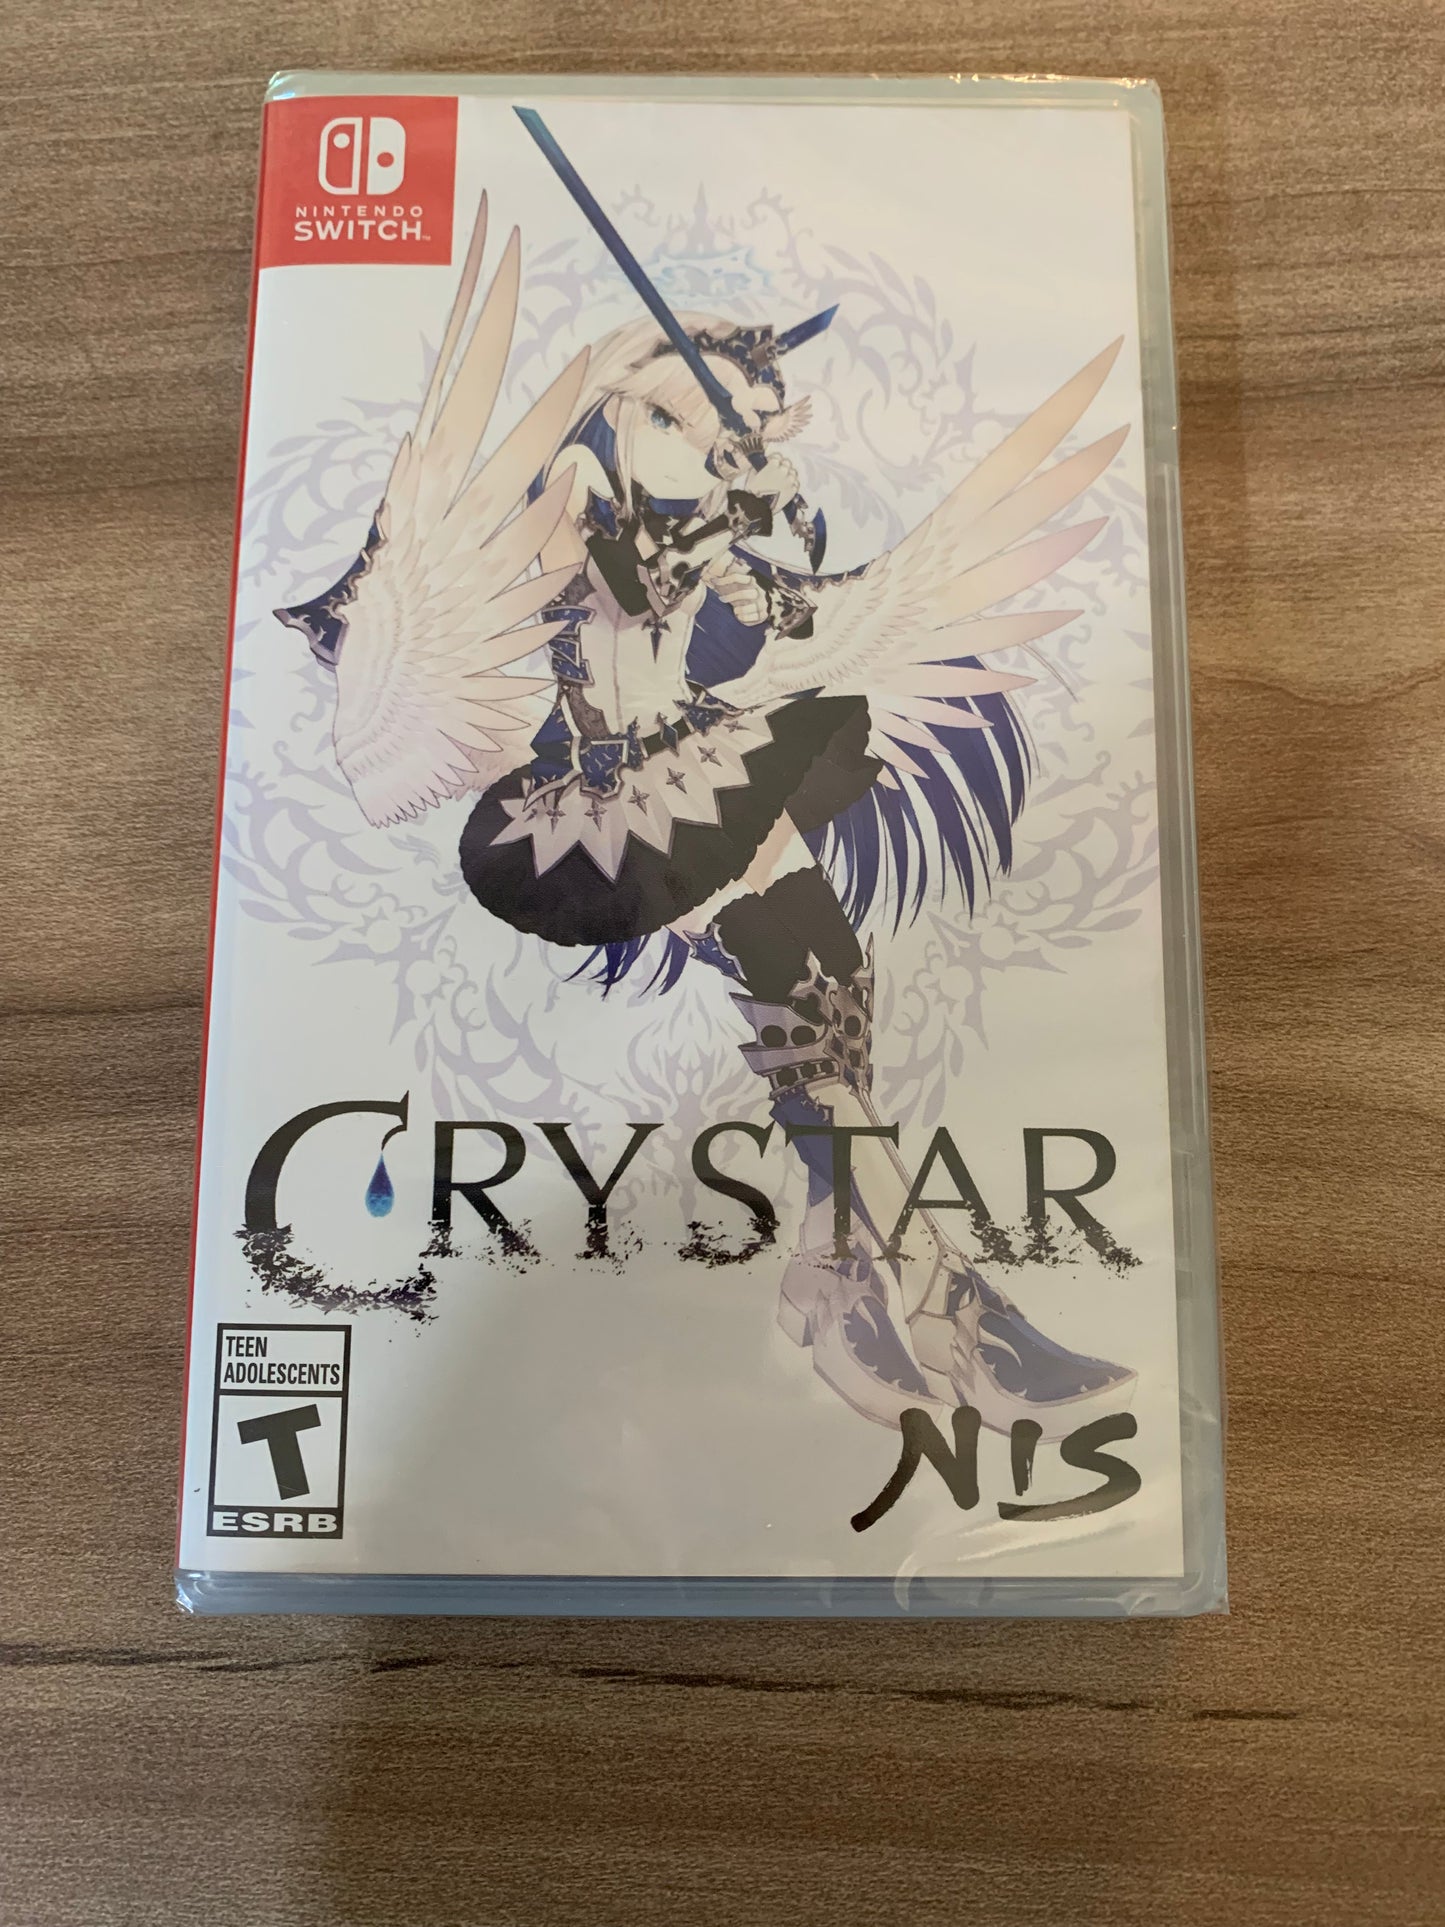 PiXEL-RETRO.COM : NINTENDO SWITCH NEW SEALED IN BOX COMPLETE MANUAL GAME NTSC CRYSTAR